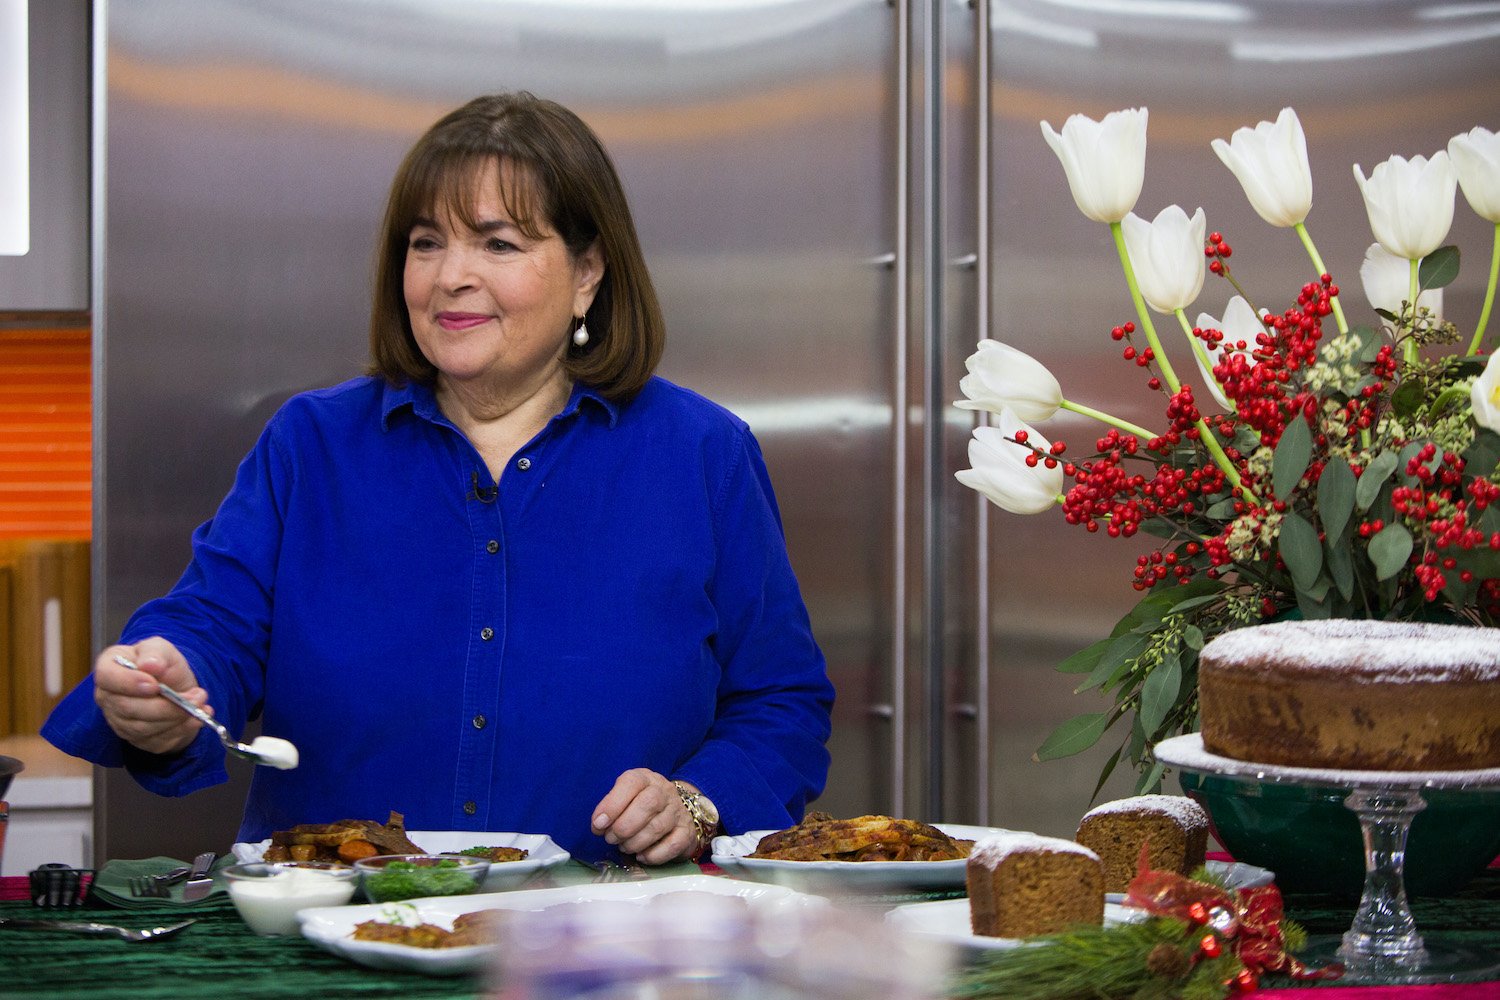 Ina Garten's Tip for Frosting a Cake - PureWow